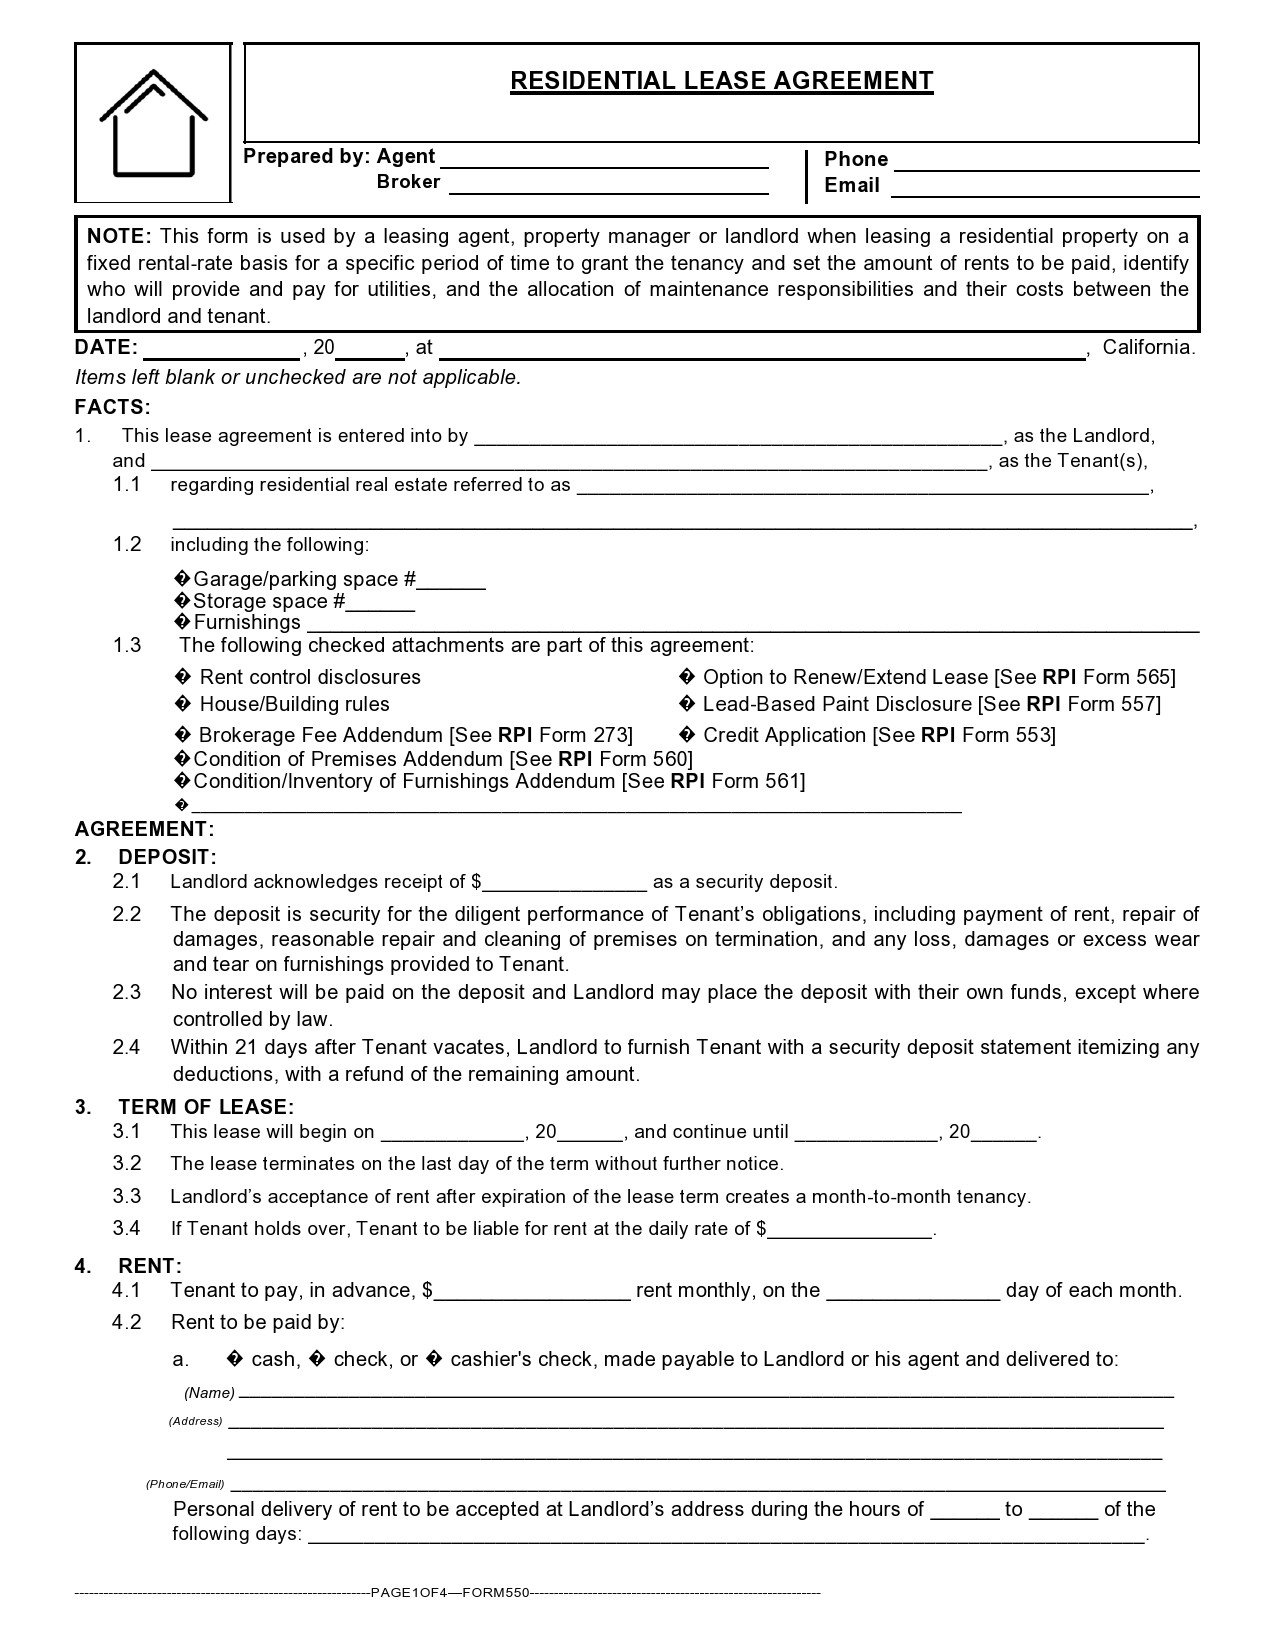 Free residential lease agreement 27